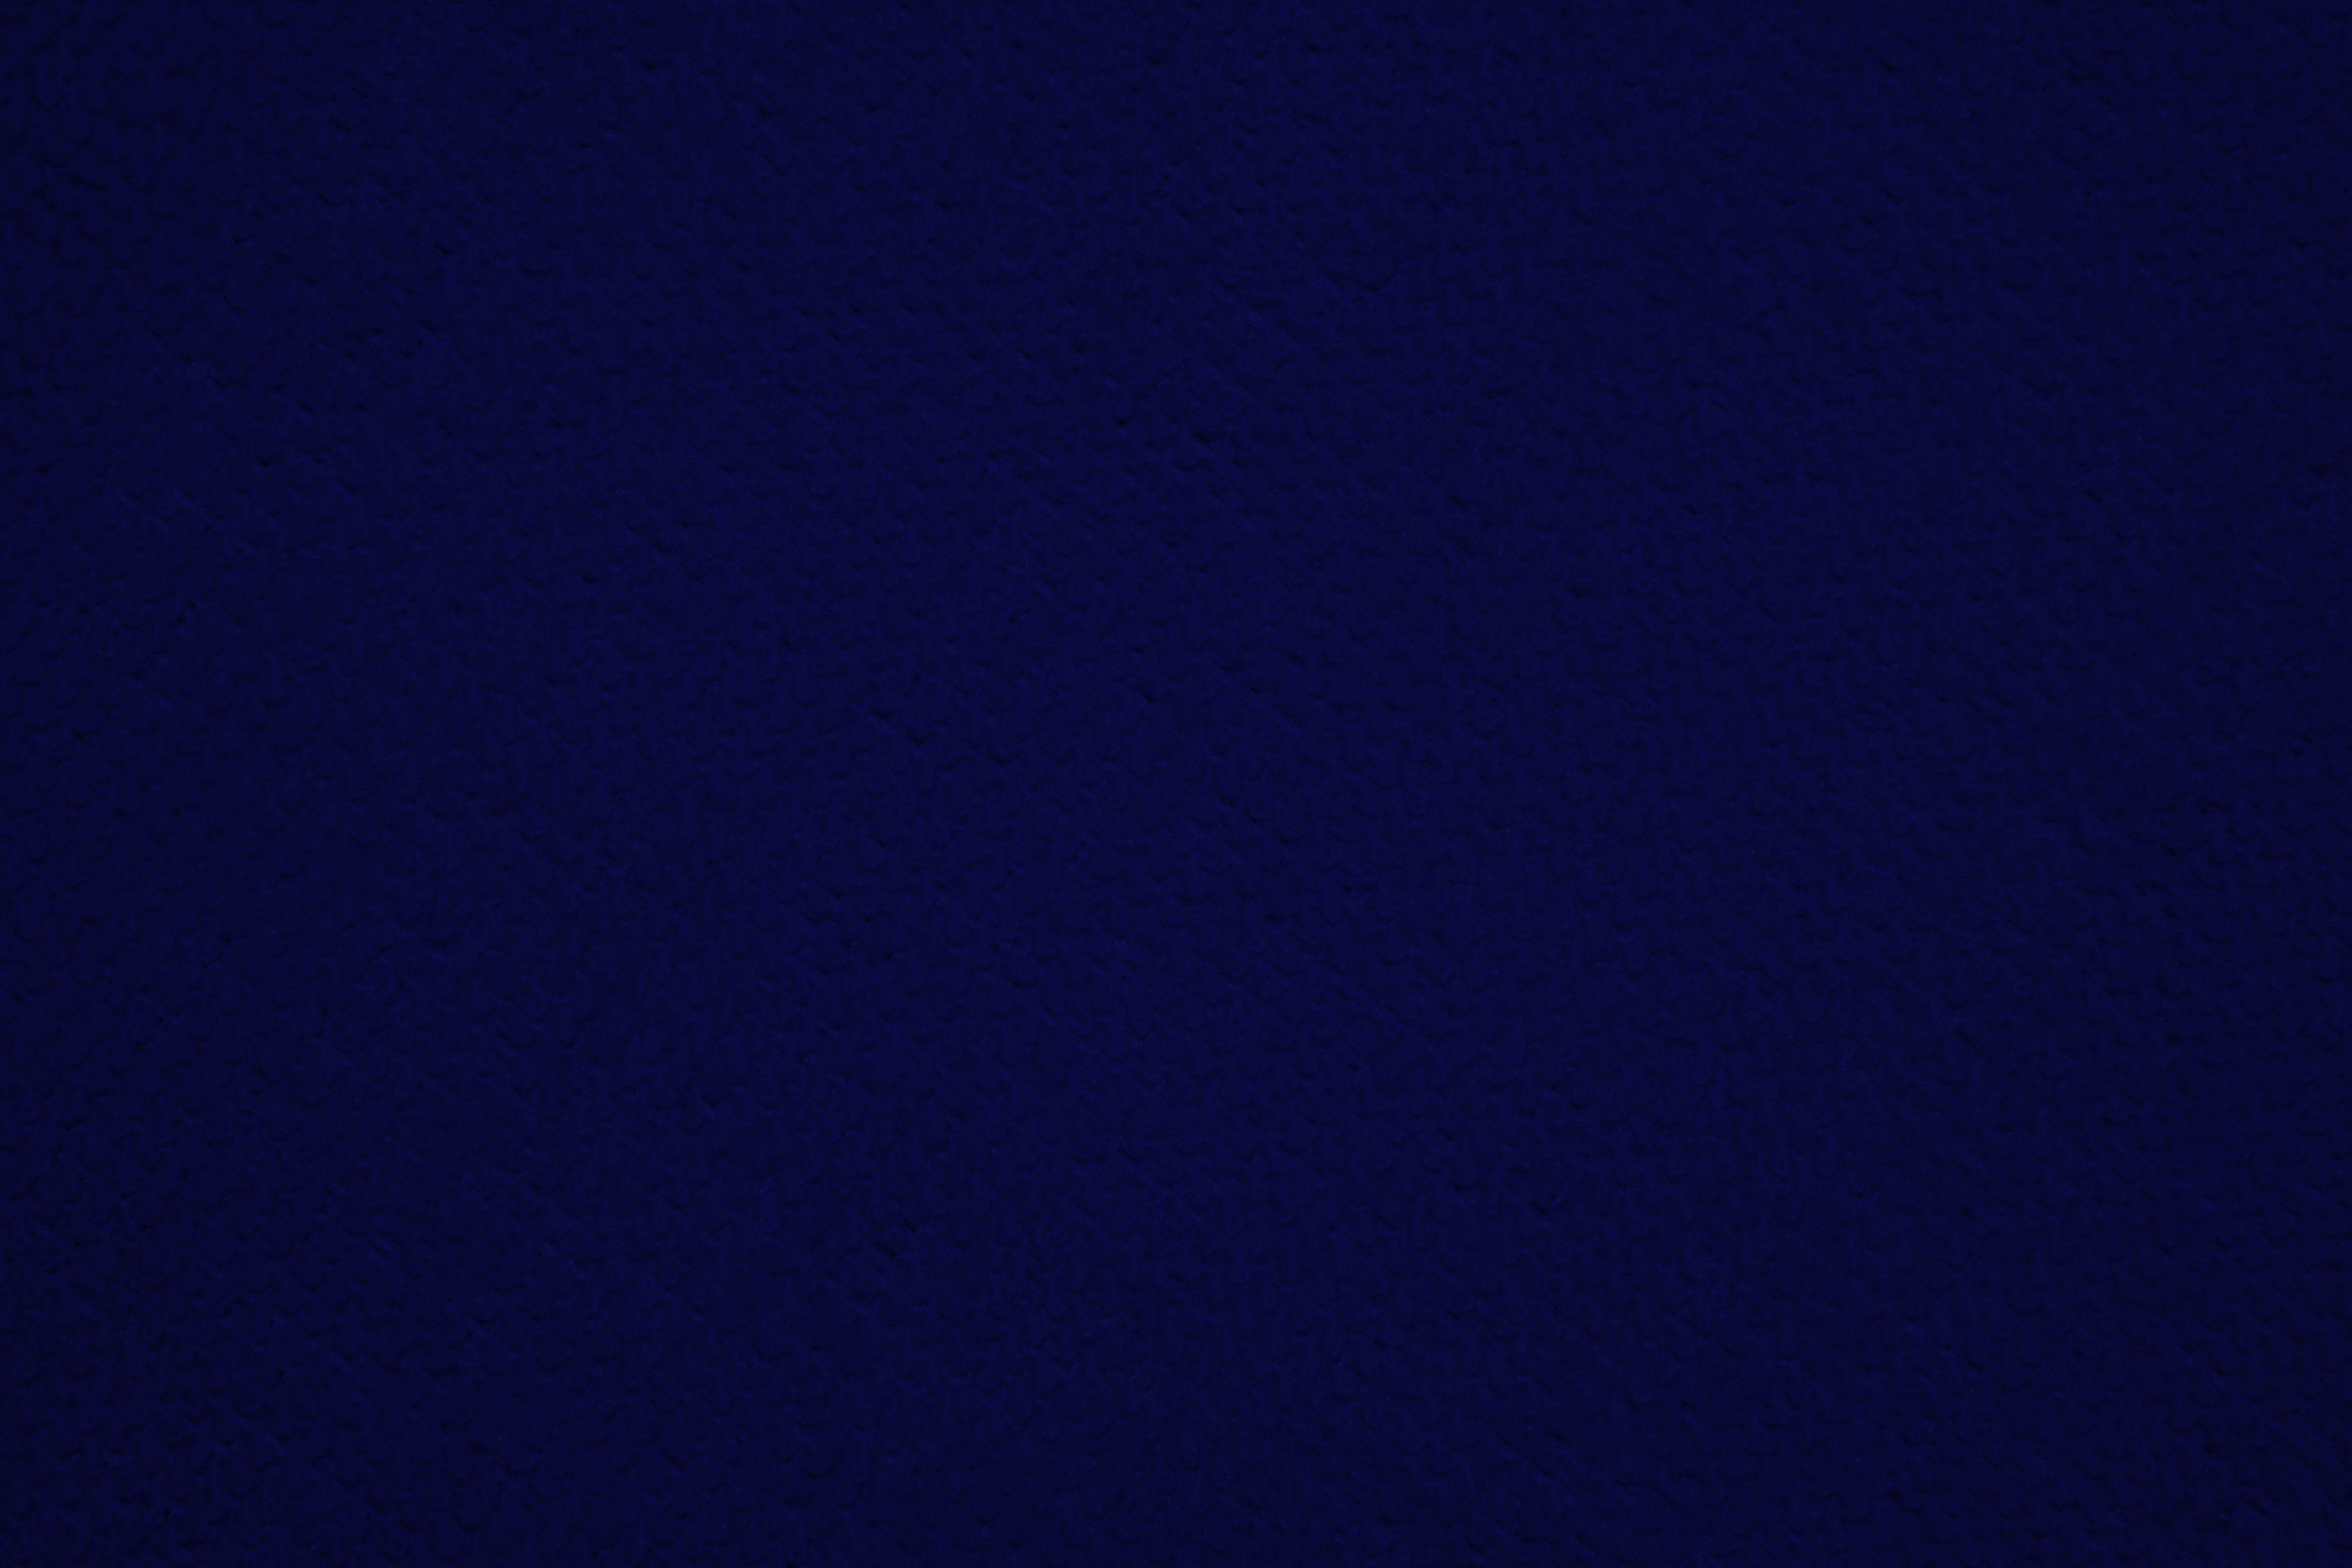 100+] Navy Blue Wallpapers